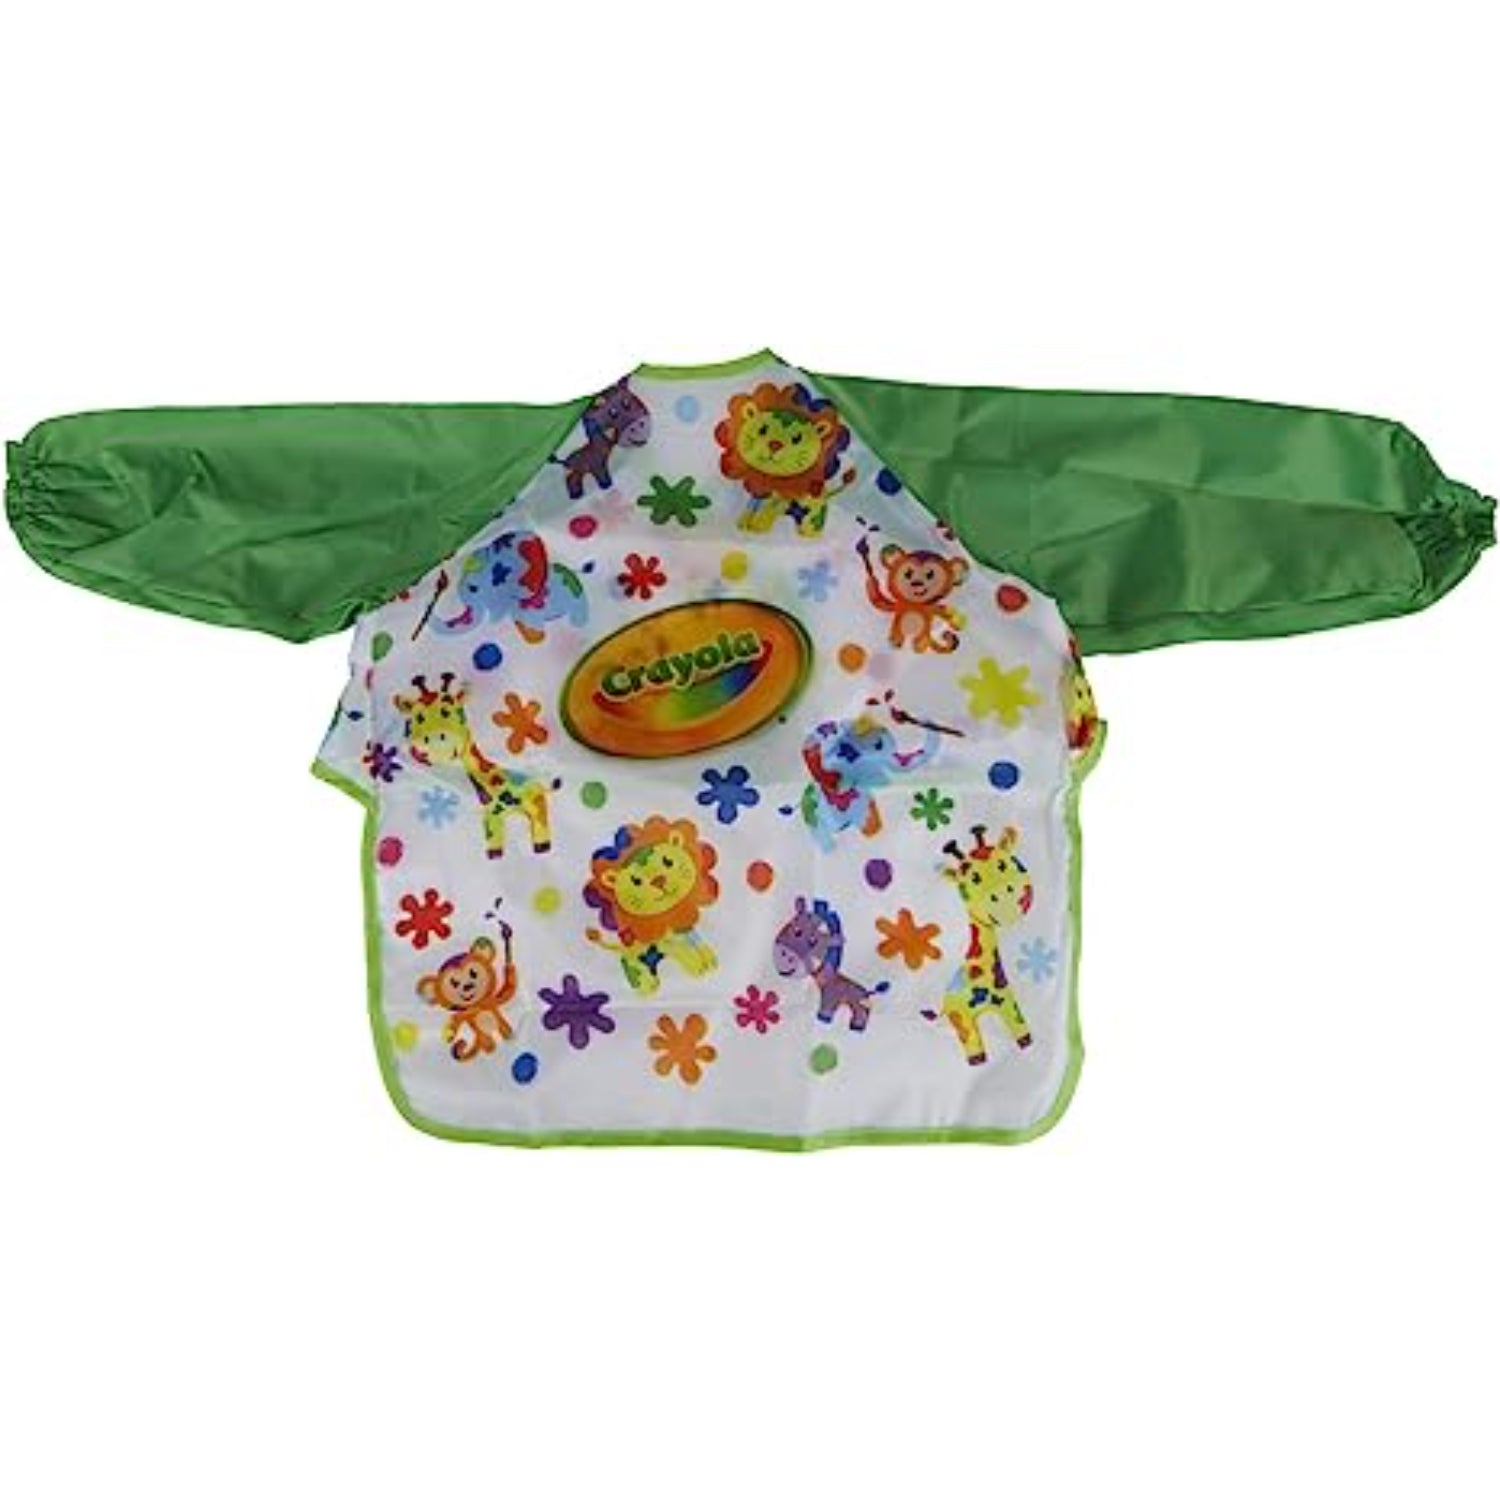 Crayola Art Smock for Toddlers, Small Waterproof Bib, Best Fit for Age 1